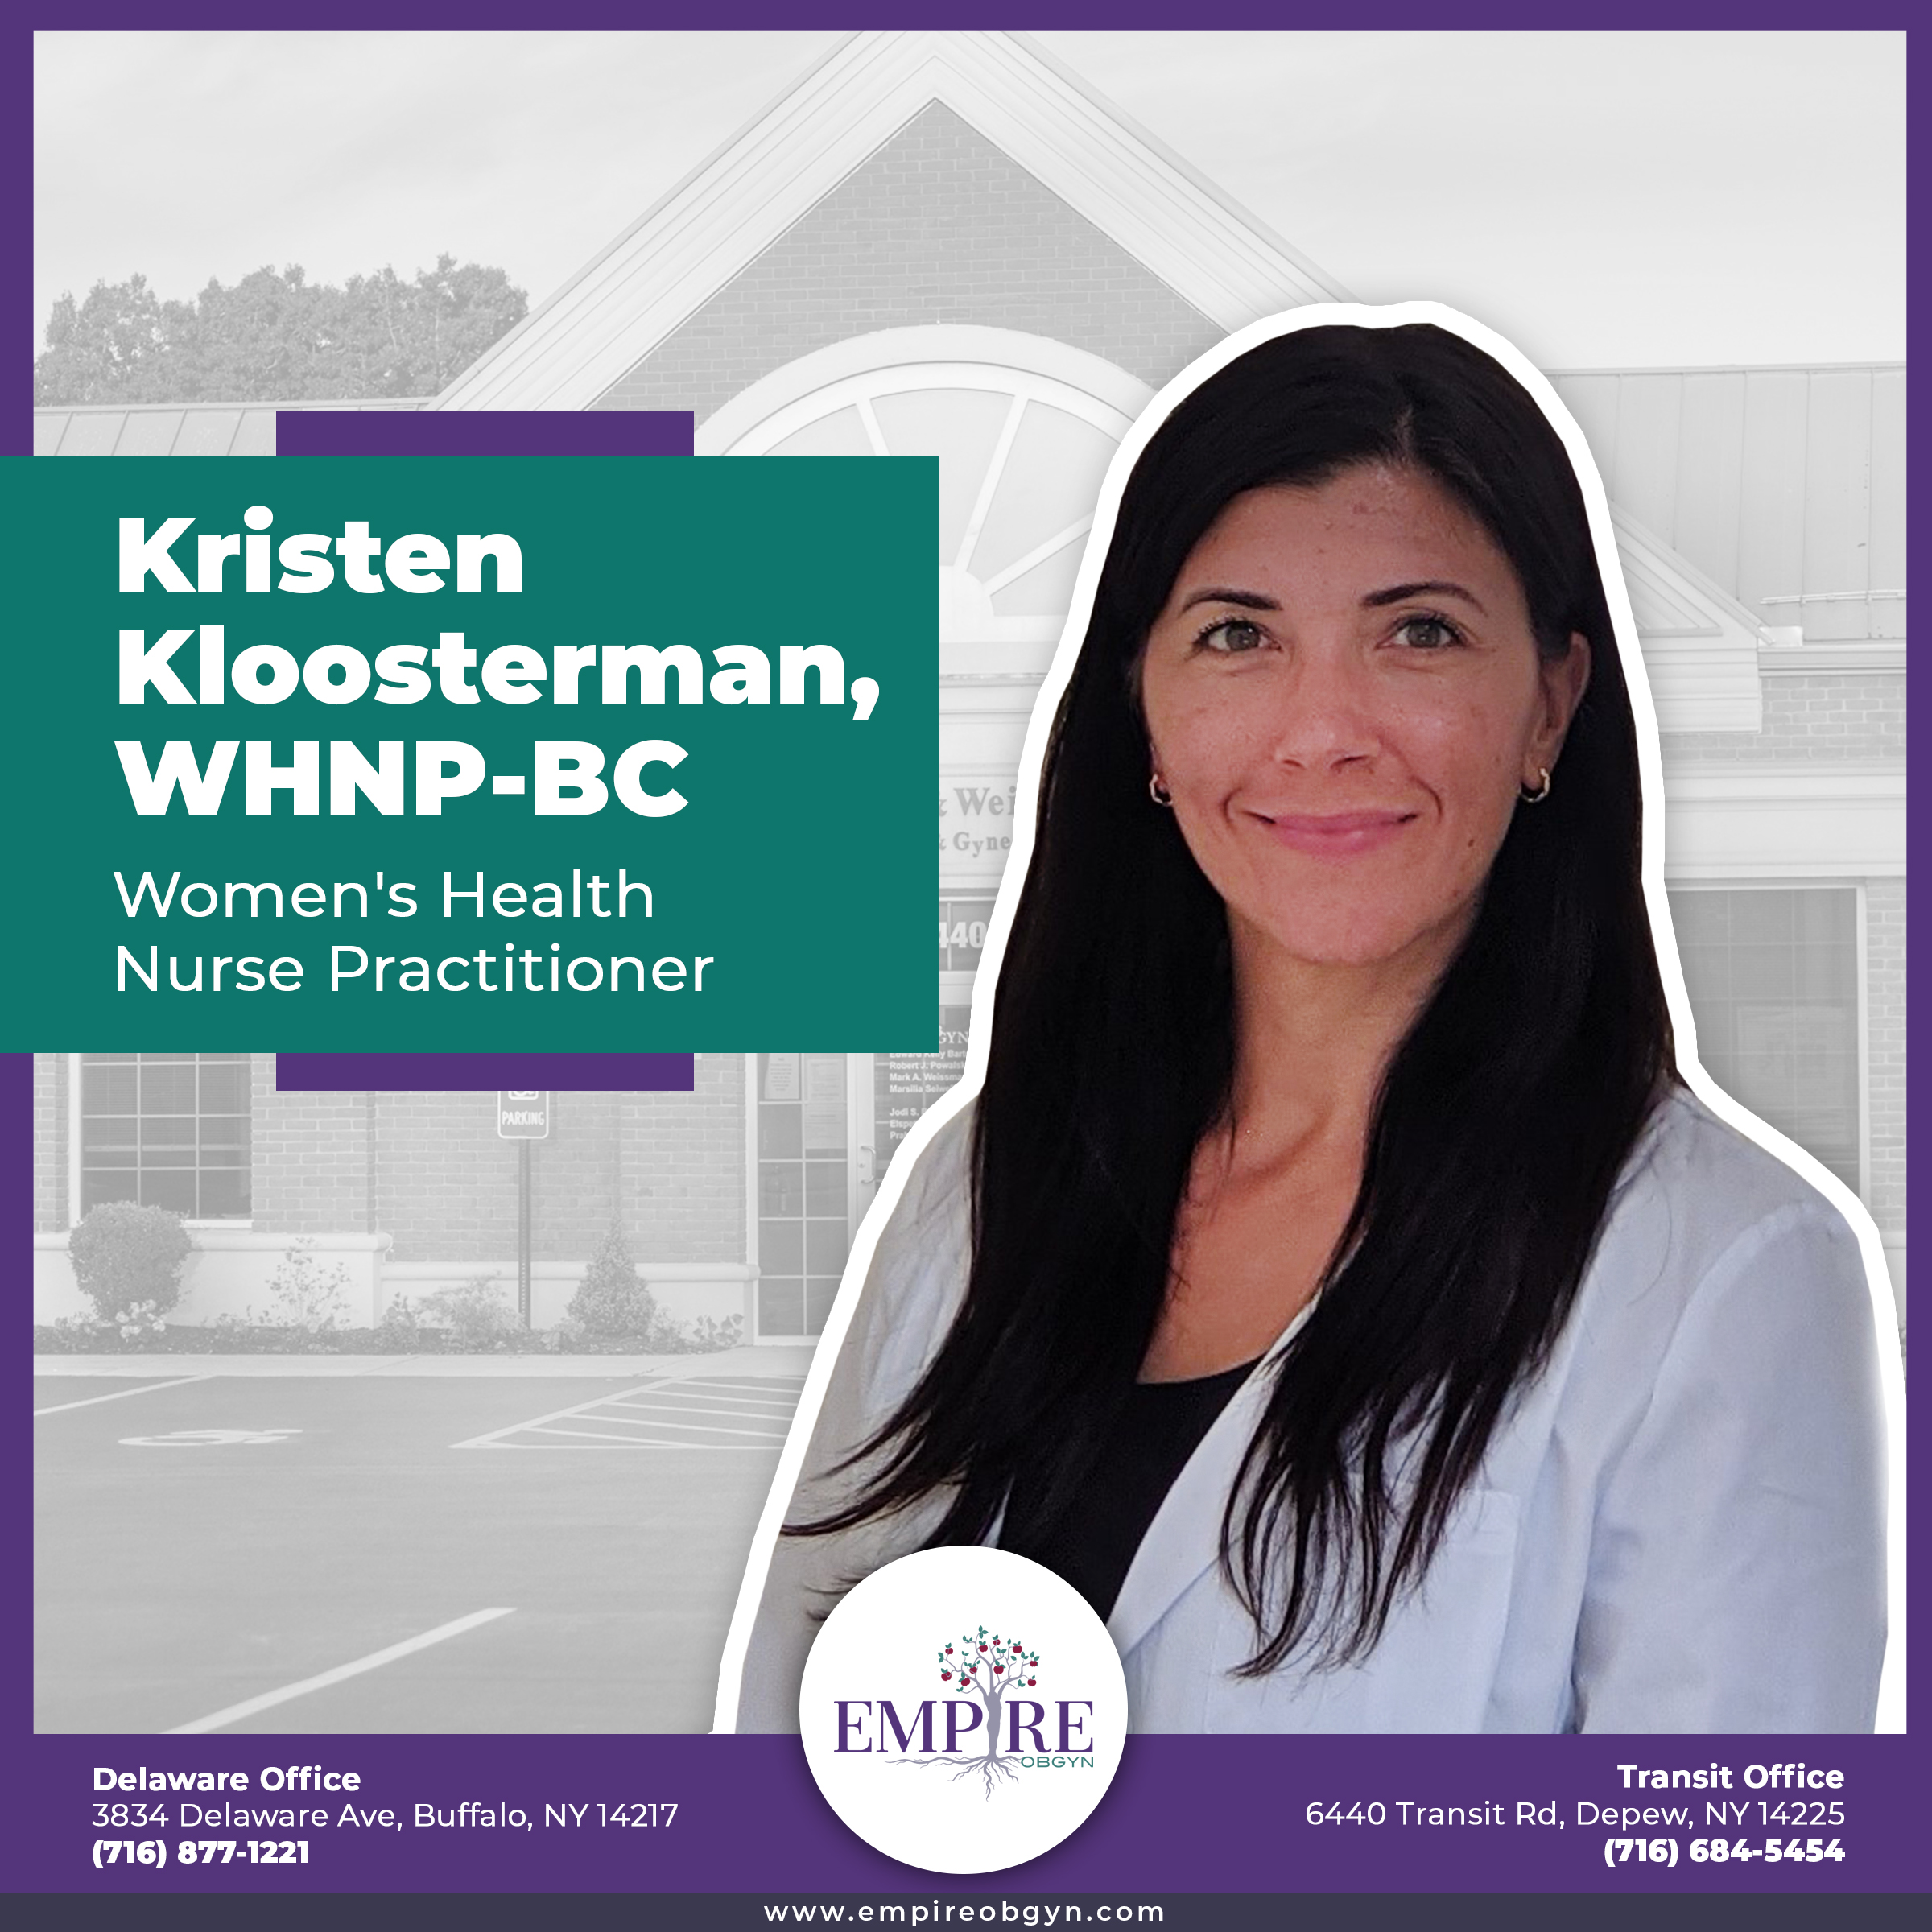 Please welcome Kristen Kloosterman — a Nationally Certified Women's Health Care Nurse Practitioner.